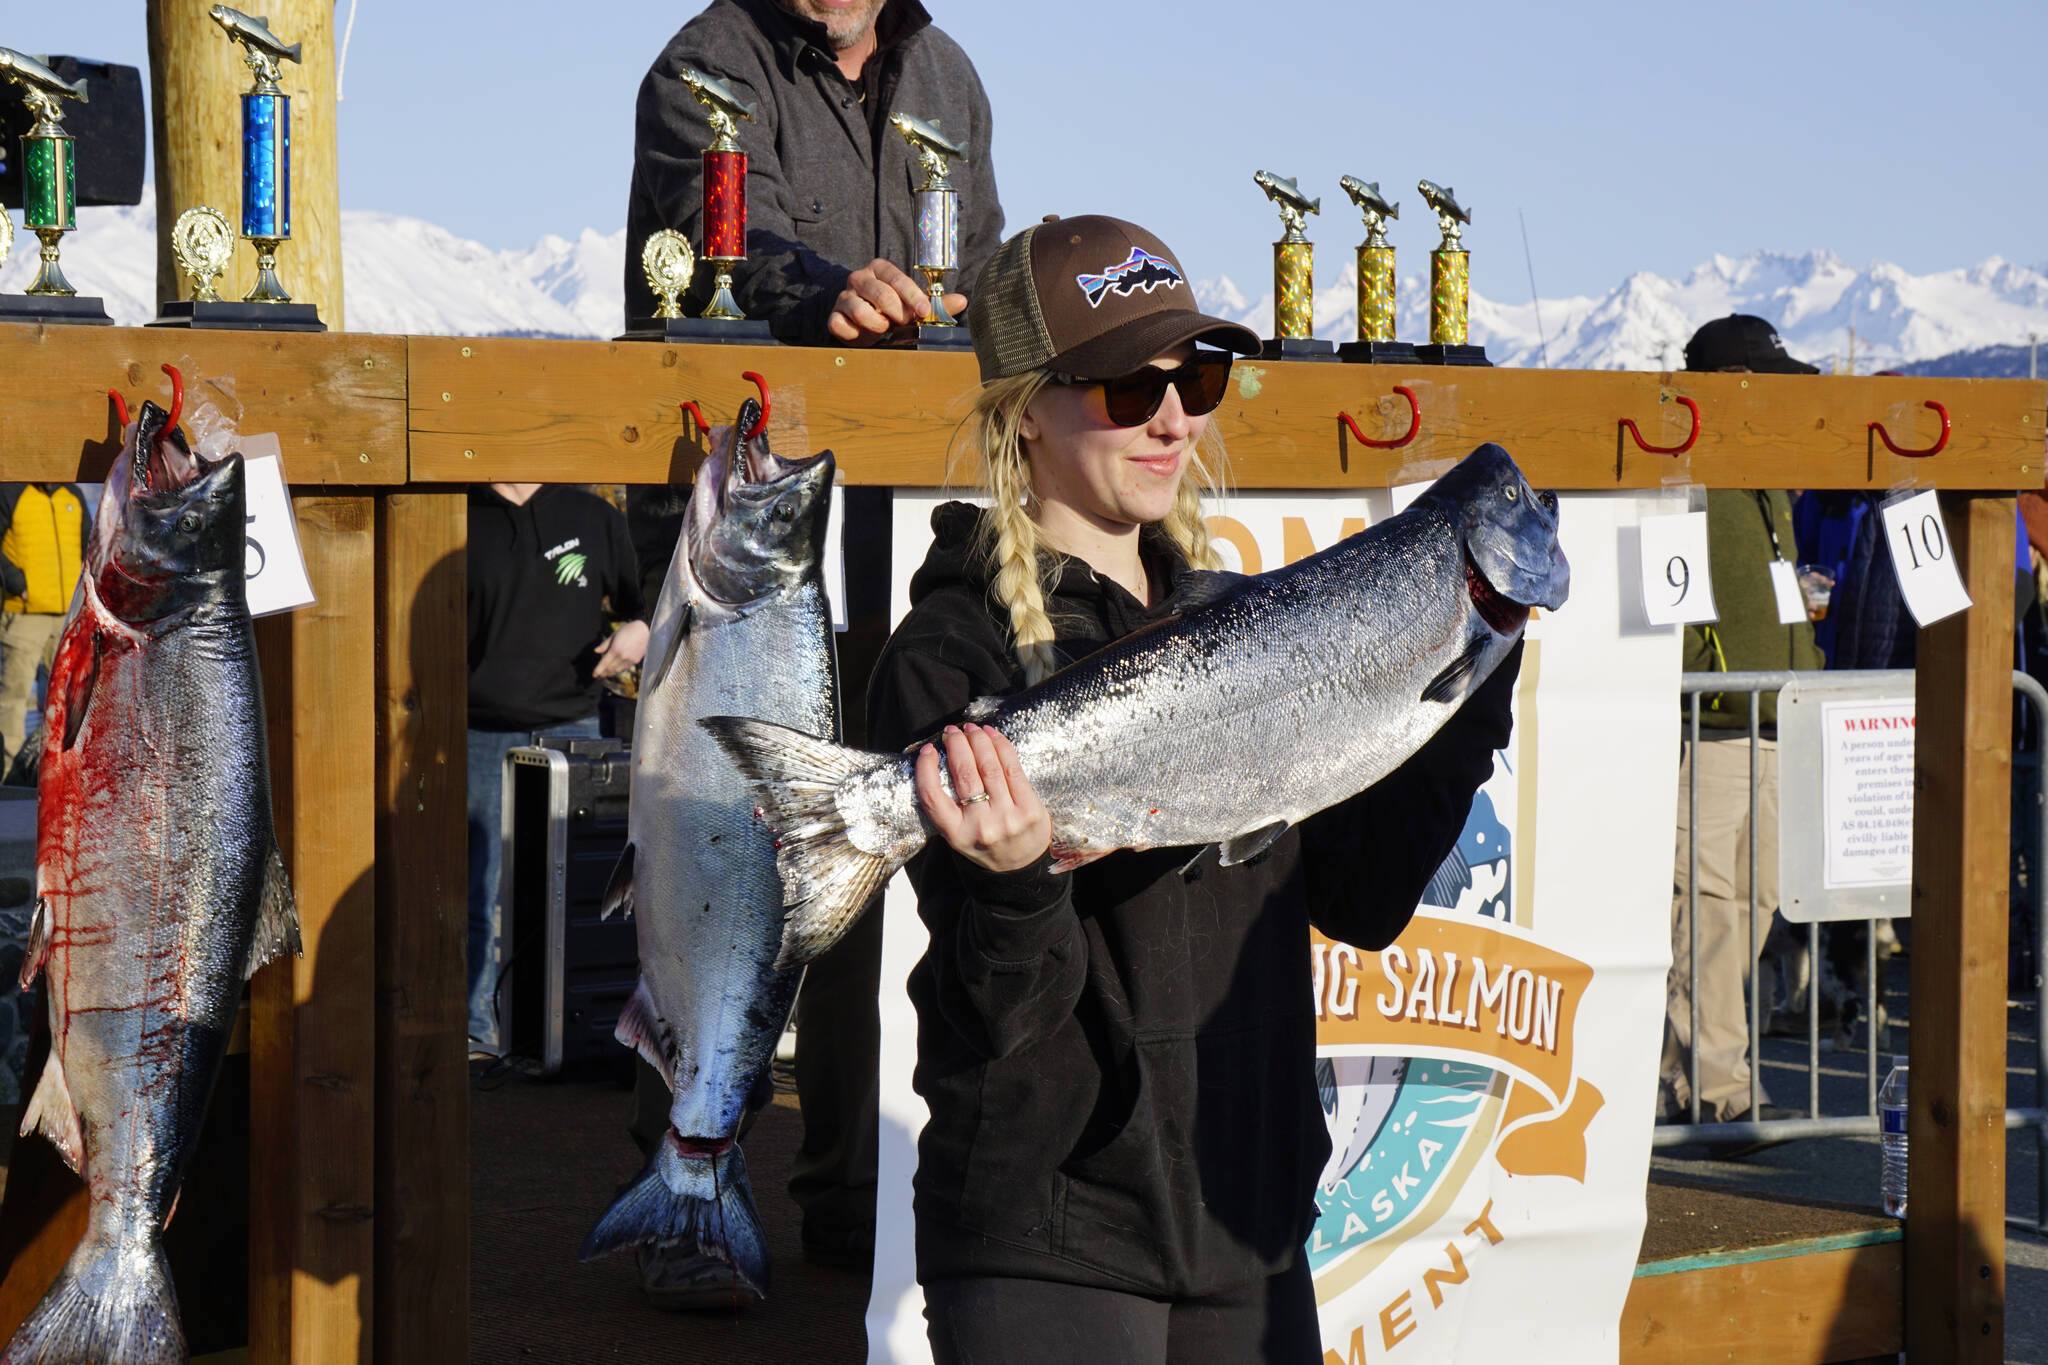 Molly Wilmer holds the 17.9-pound winter king salmon she caught in the 28th annual Homer Winter King Salmon Tourament on Sunday, April 10, 2022, in Kachemak Bay, Homer, Alaska. Wilmer took seventh place and was the top woman angler. (Photo by Michael Armstrong/Homer News)